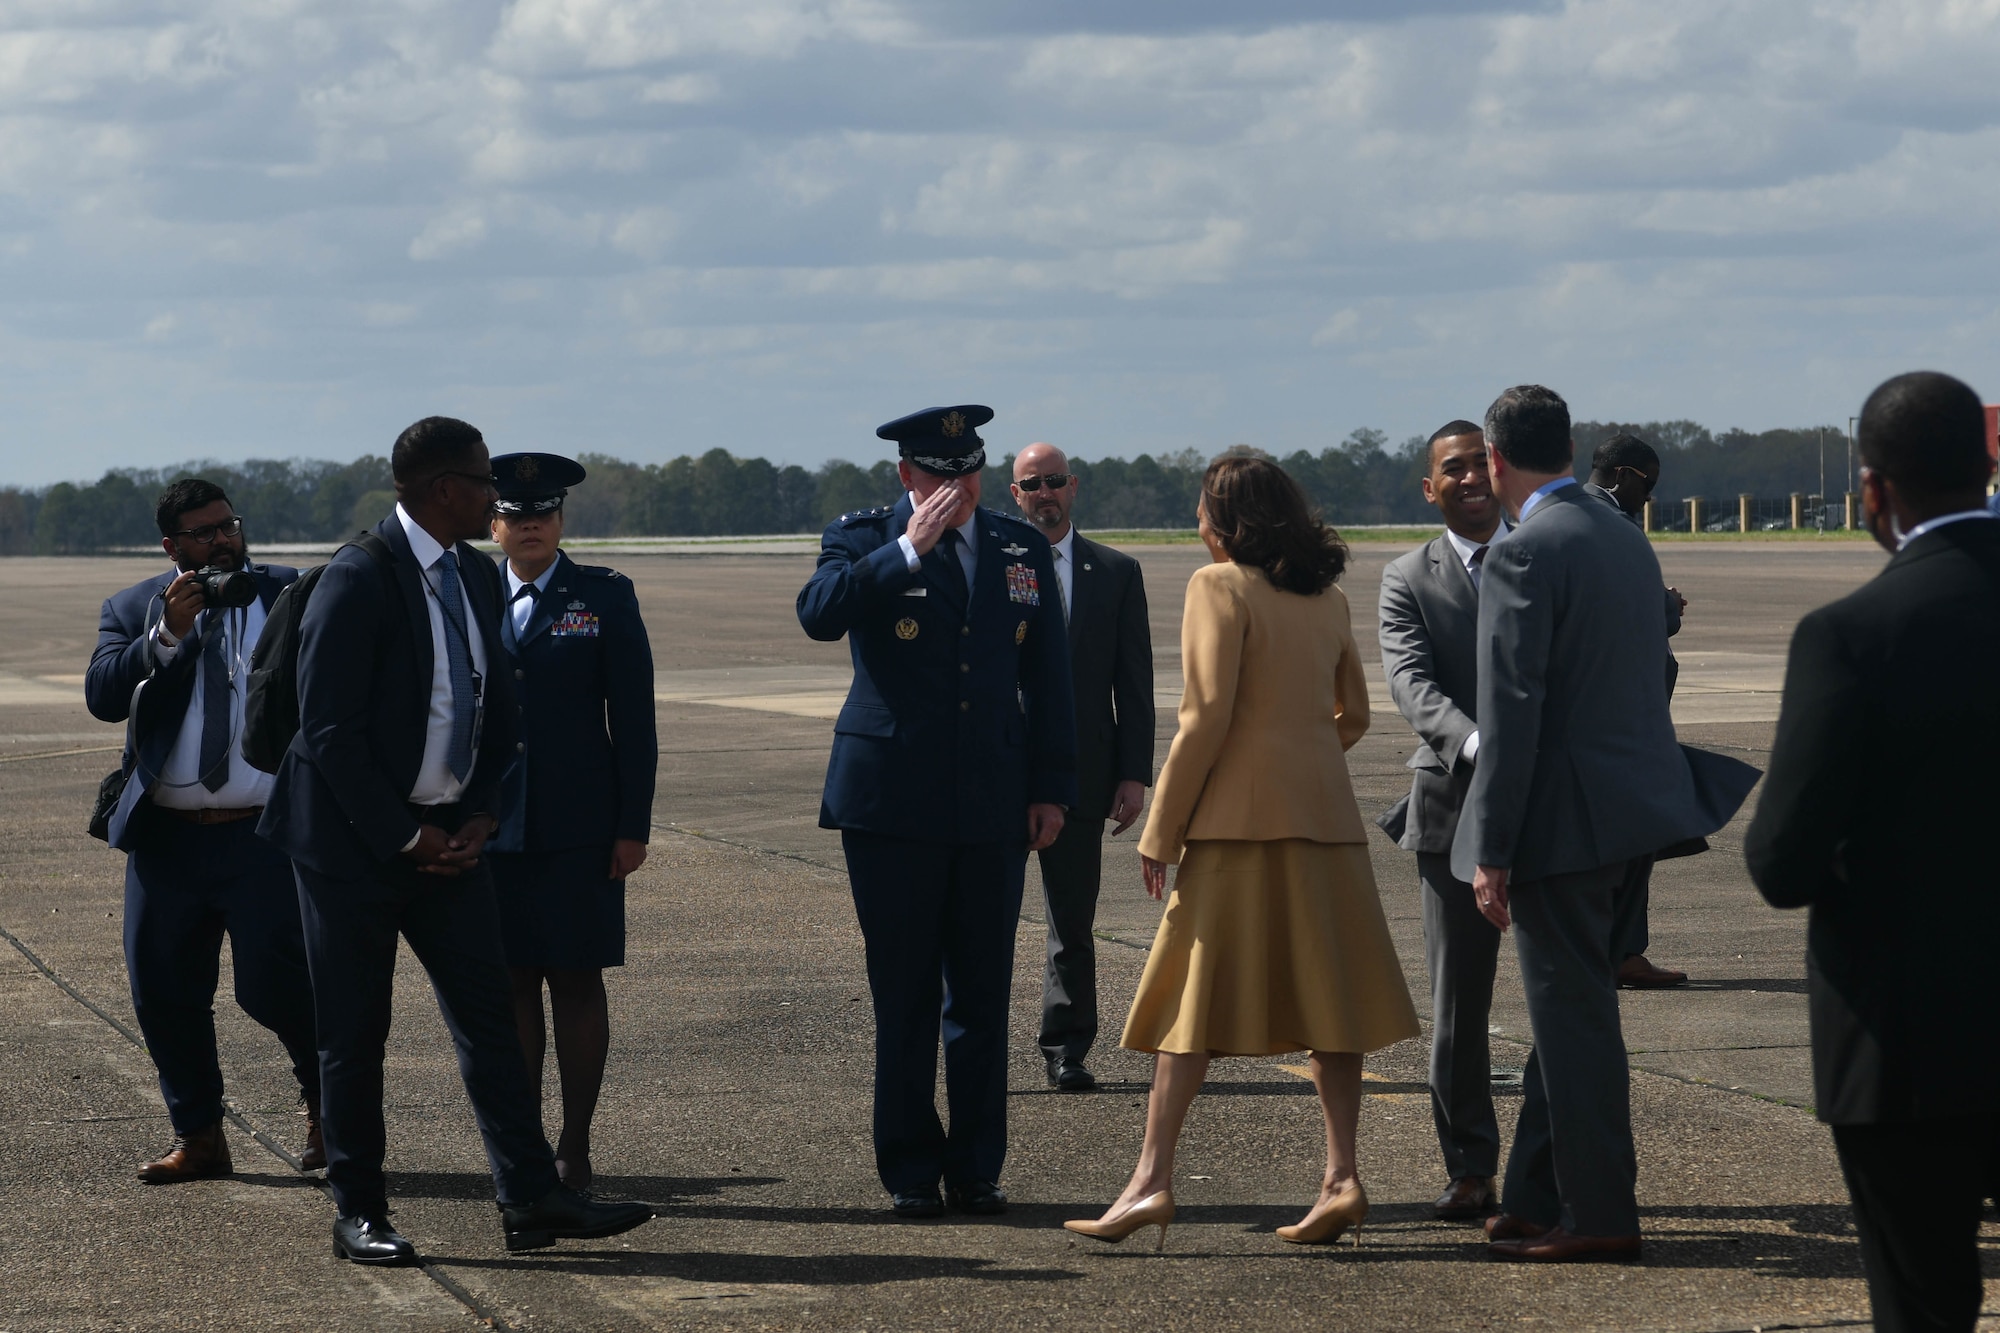 Lt. Gen. James Hecker, Air University commander and president, salutes Vice President Kamala Harris on Maxwell Air Force Base, Alabama March 6, 2022. Harris visited Alabama to commemorate the 57th anniversary of Bloody Sunday, a civil rights march that turned to tragedy. (U.S. Air Force photo by Senior Airman Jackson Manske)